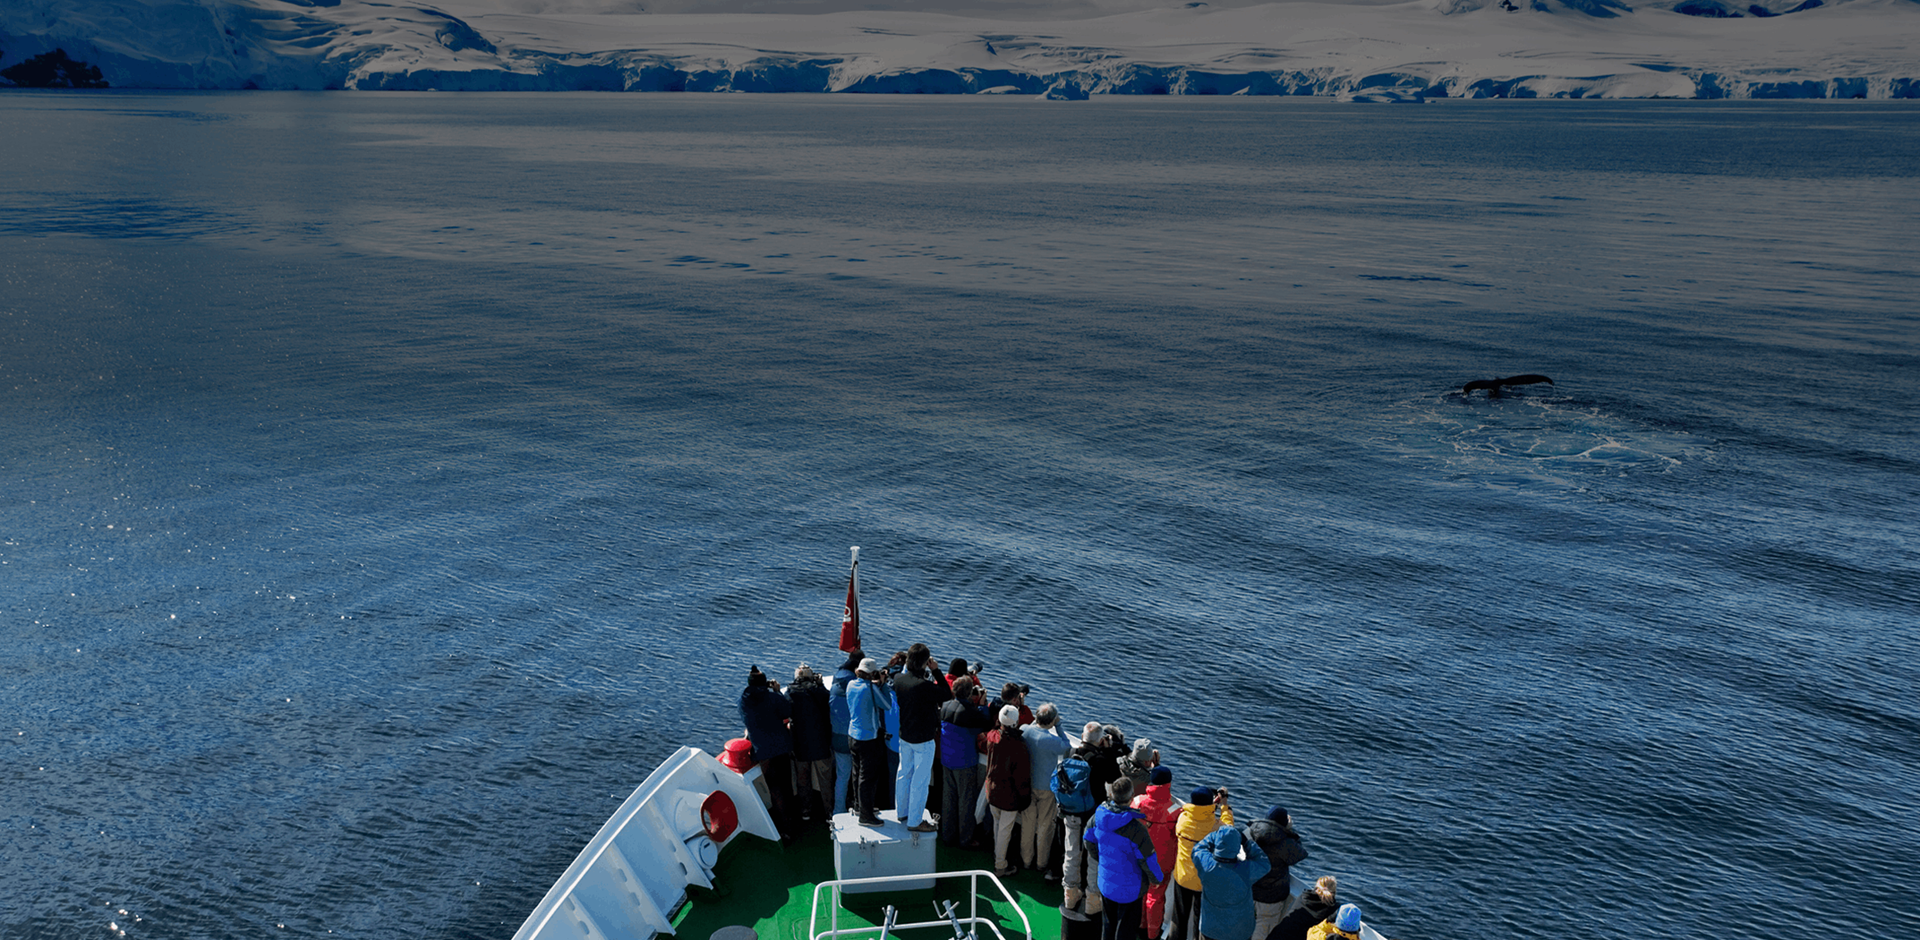 Tourists watching and photographing a whale from the deck of G.A.P Adventures MS Explorer cruise ship, Antarctica.